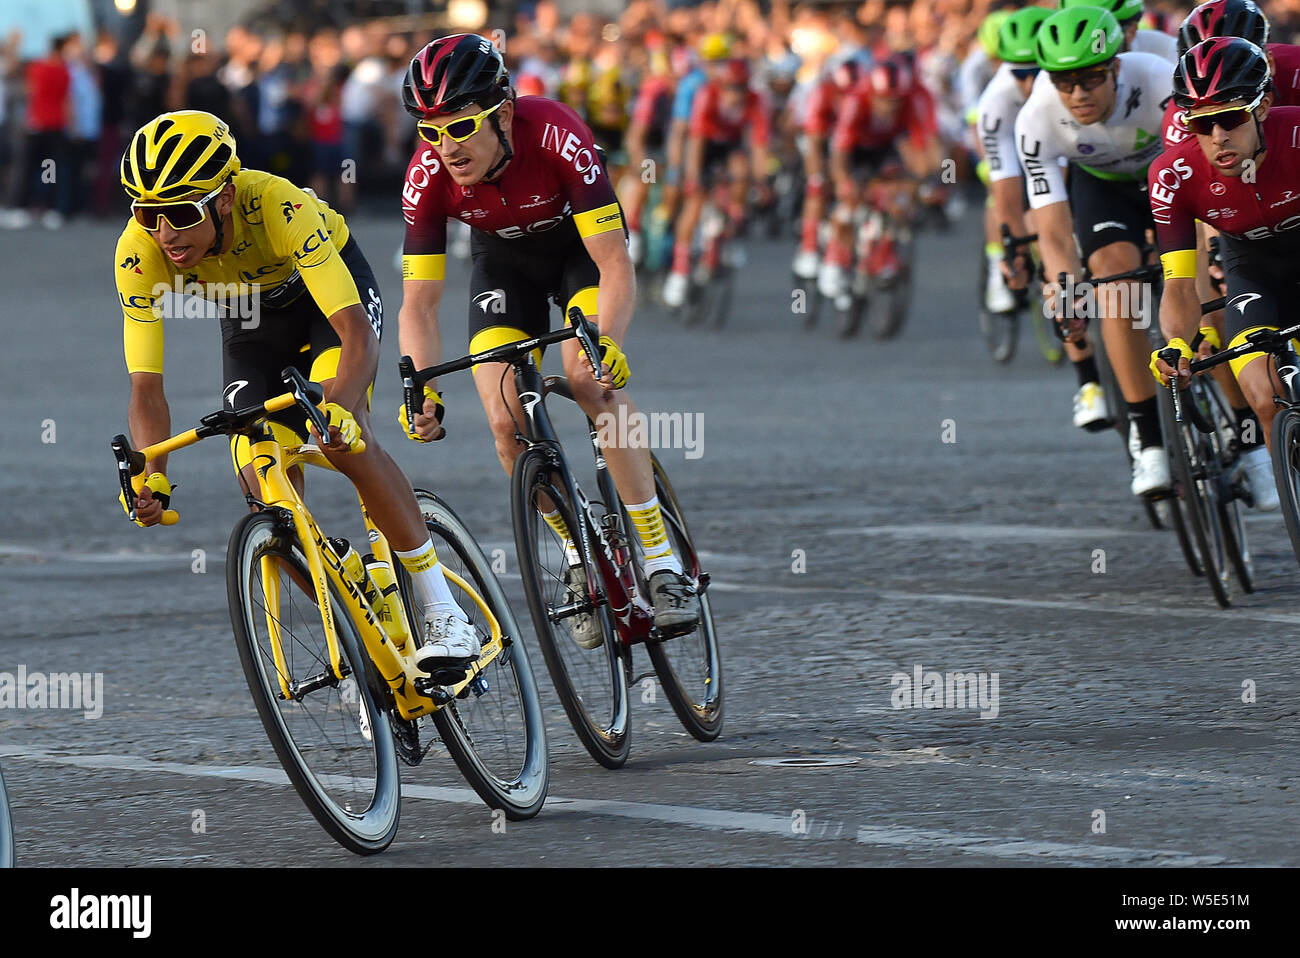 Team Ineos' Egan Bernal and Geraint Thomas during stage 21 of the Tour de France. during stage 21 of the Tour de France during stage 21 of the Tour de France. Stock Photo